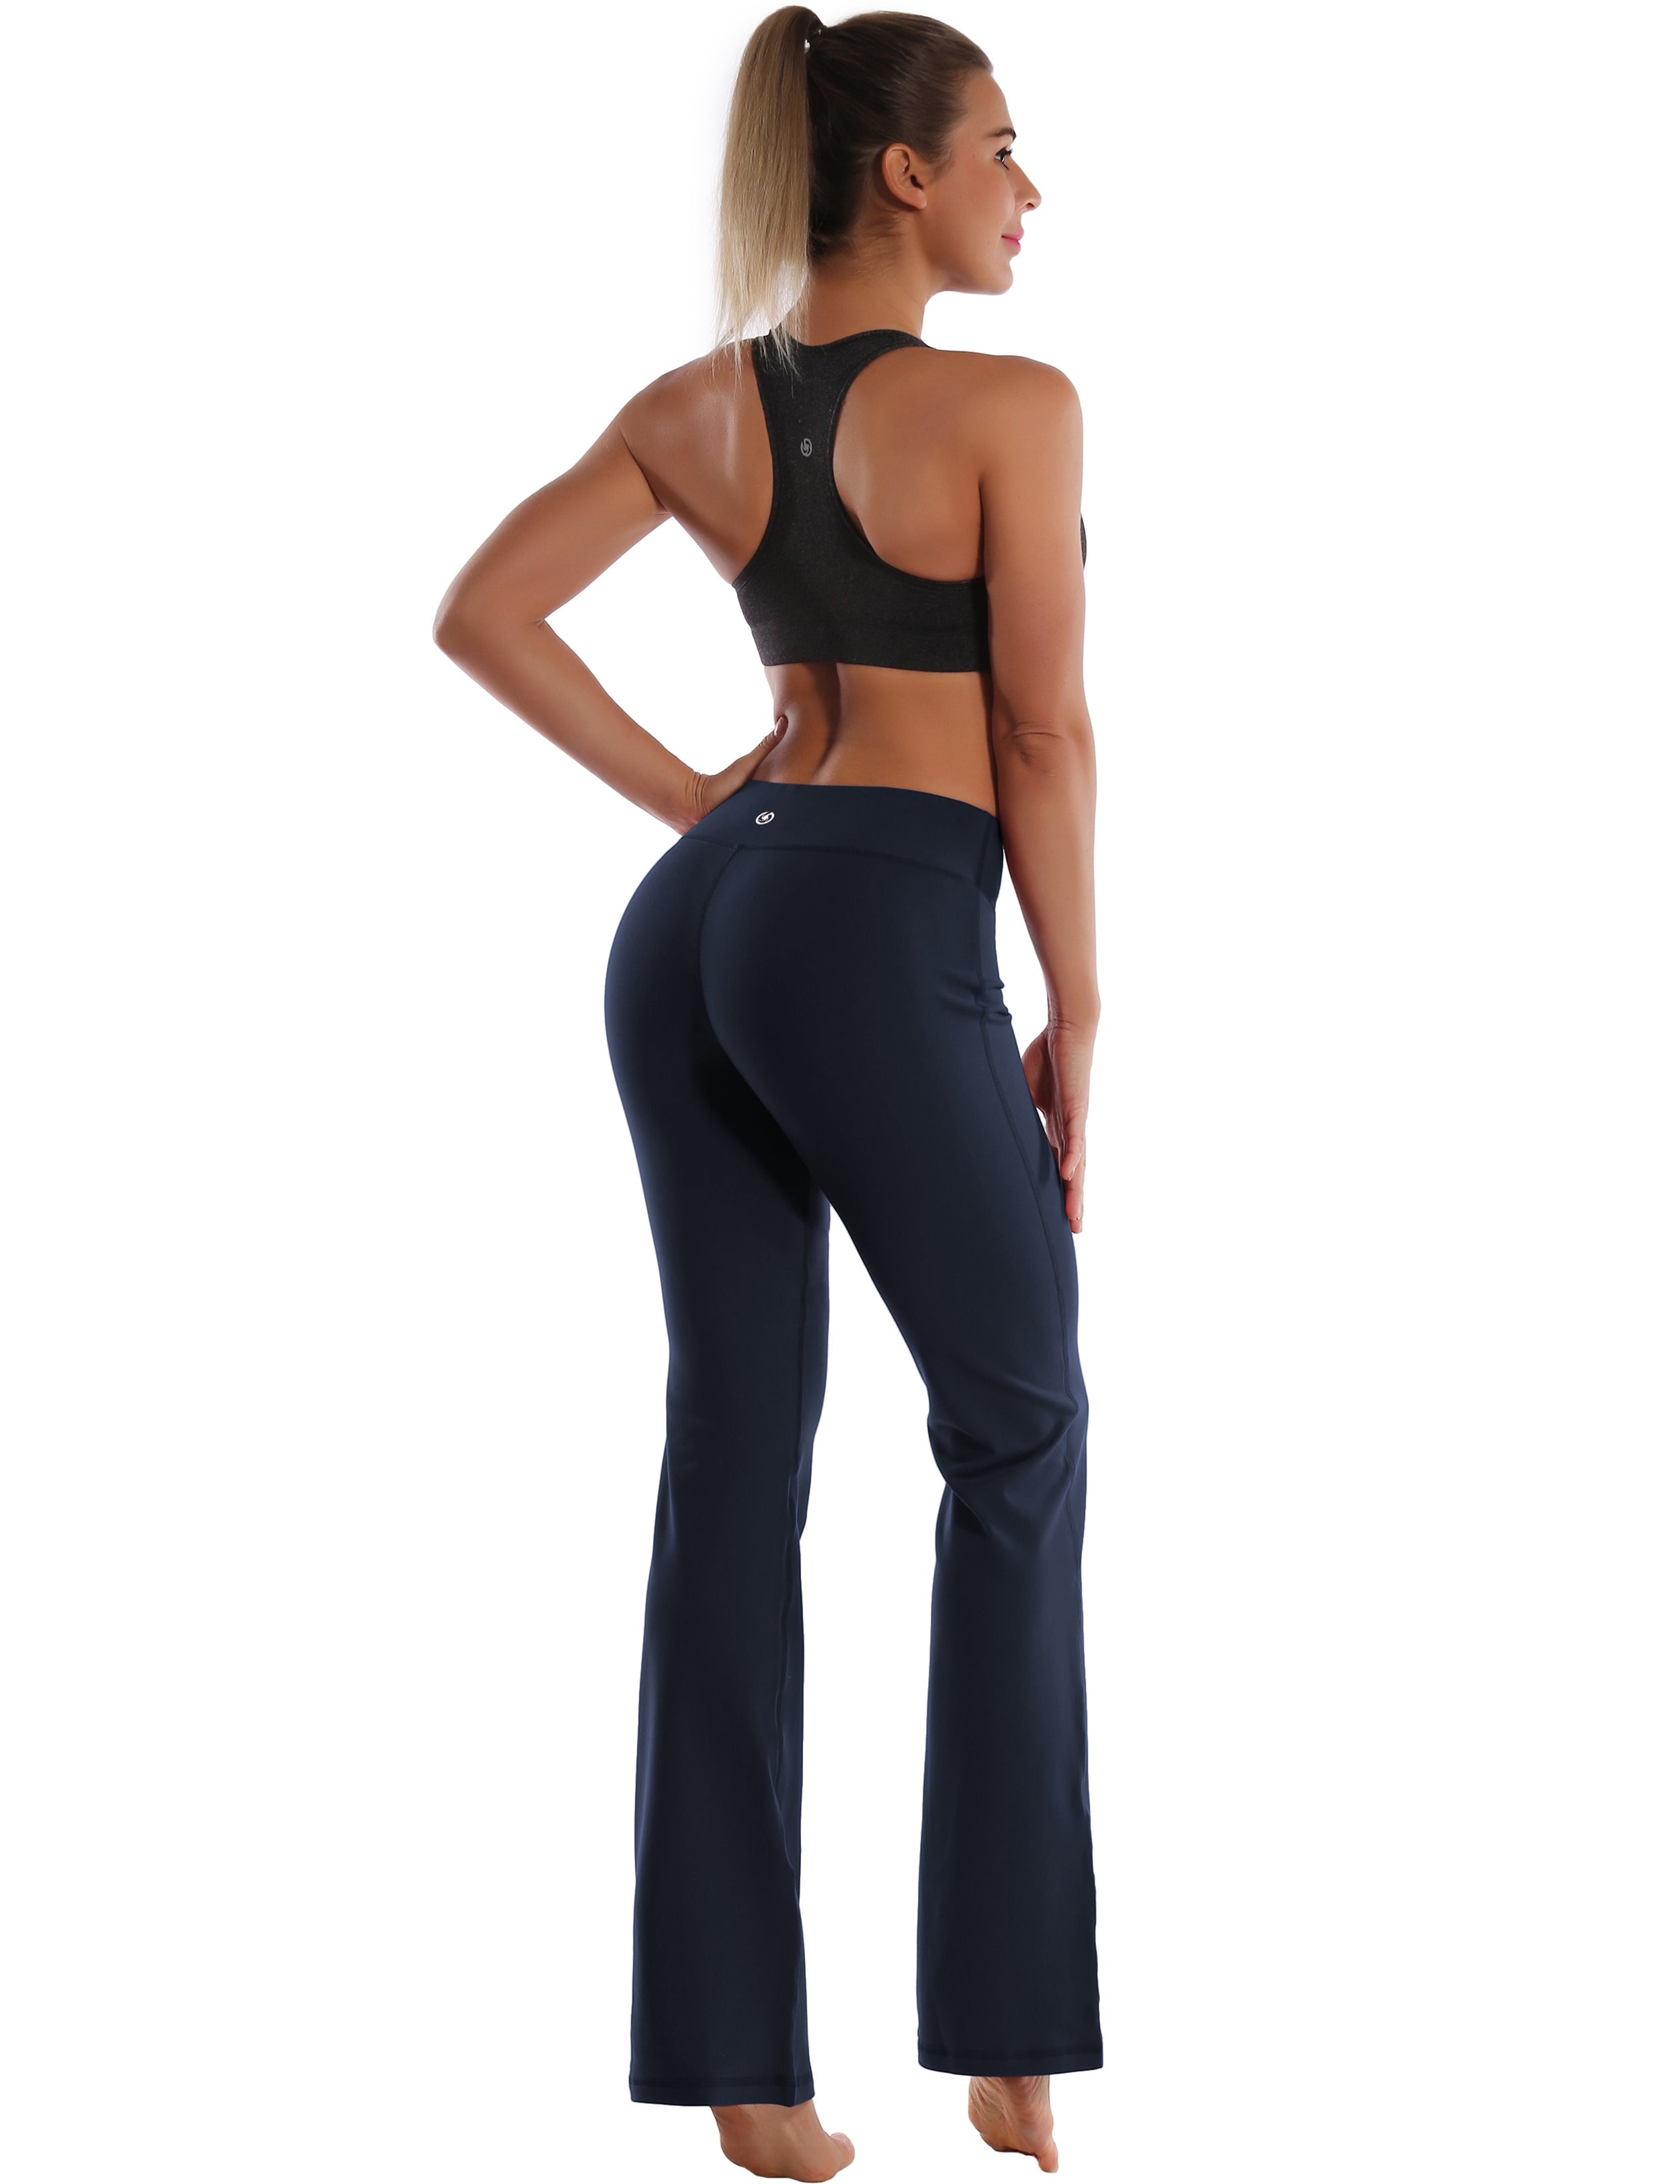 Cotton Nylon Bootcut Leggings darknavy 87%Nylon/13%Spandex (Super soft, cotton feel , 280gsm) Fabric doesn't attract lint easily 4-way stretch No see-through Moisture-wicking Inner pocket Four lengths